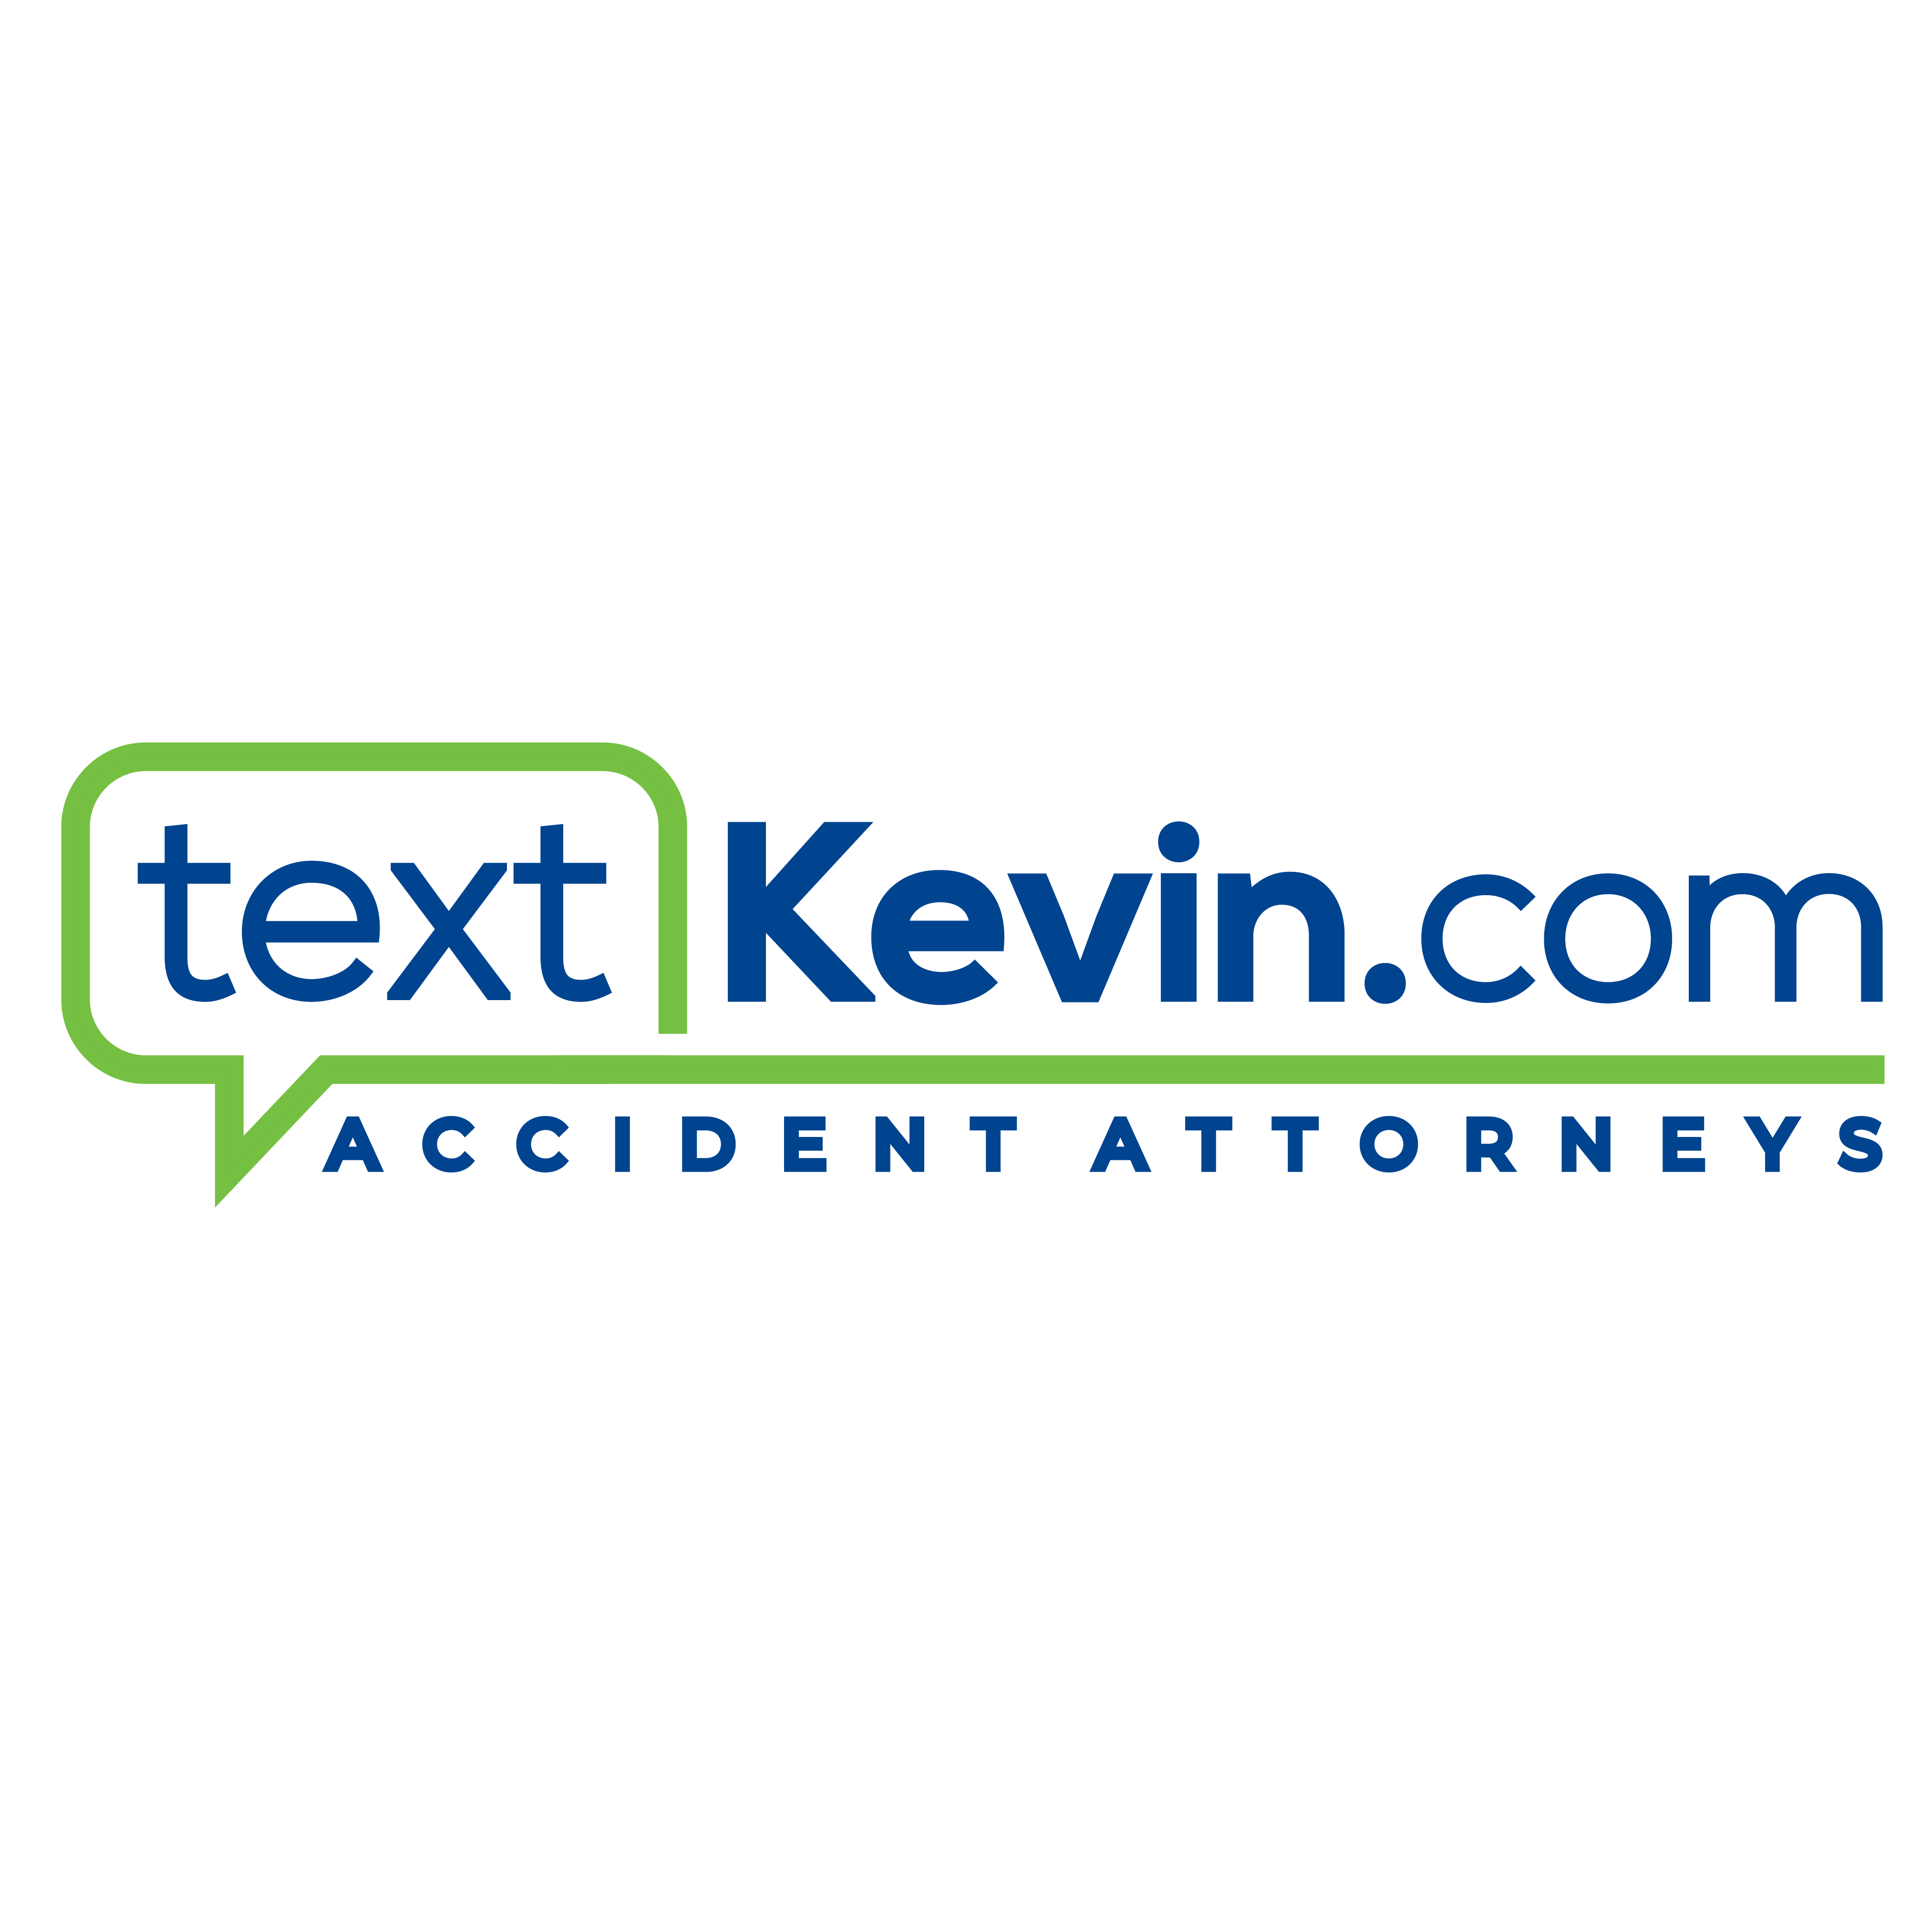 Text Kevin Accident Attorneys - Palm Springs, CA 92262 - (760)400-0000 | ShowMeLocal.com